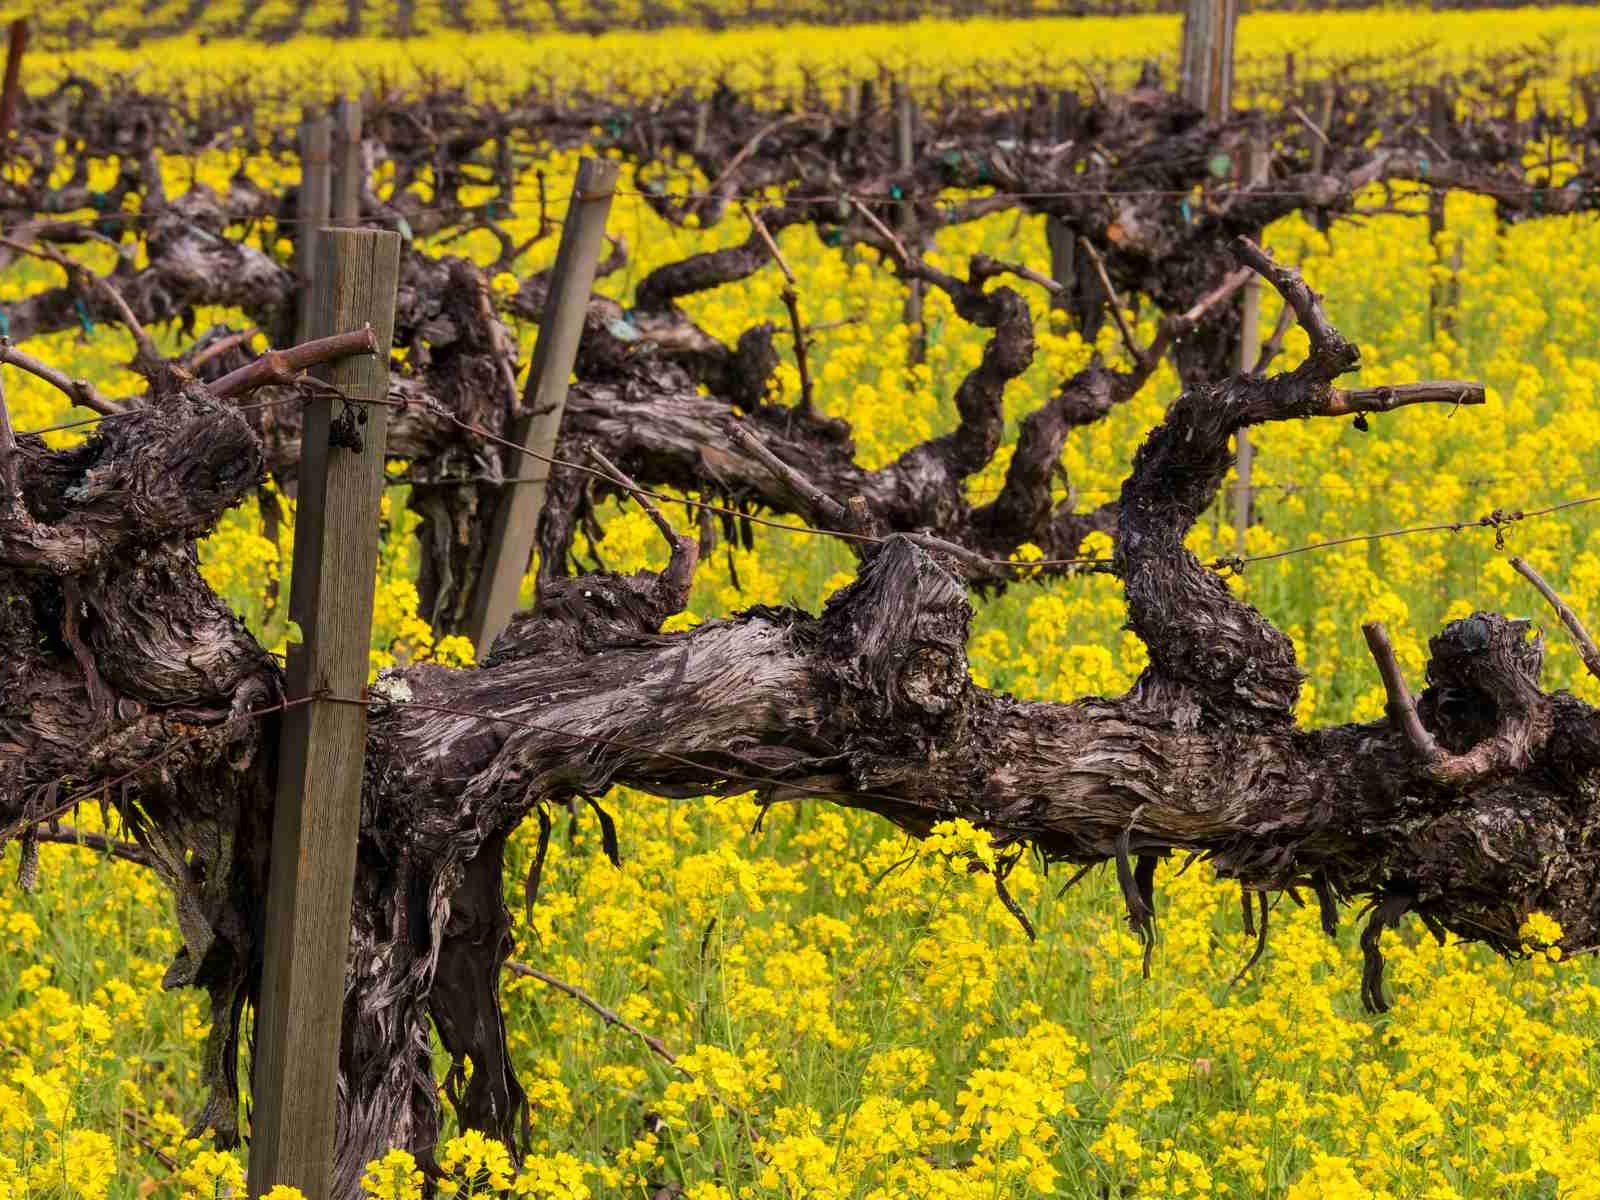 An old vine surrounded by mustard flowers.